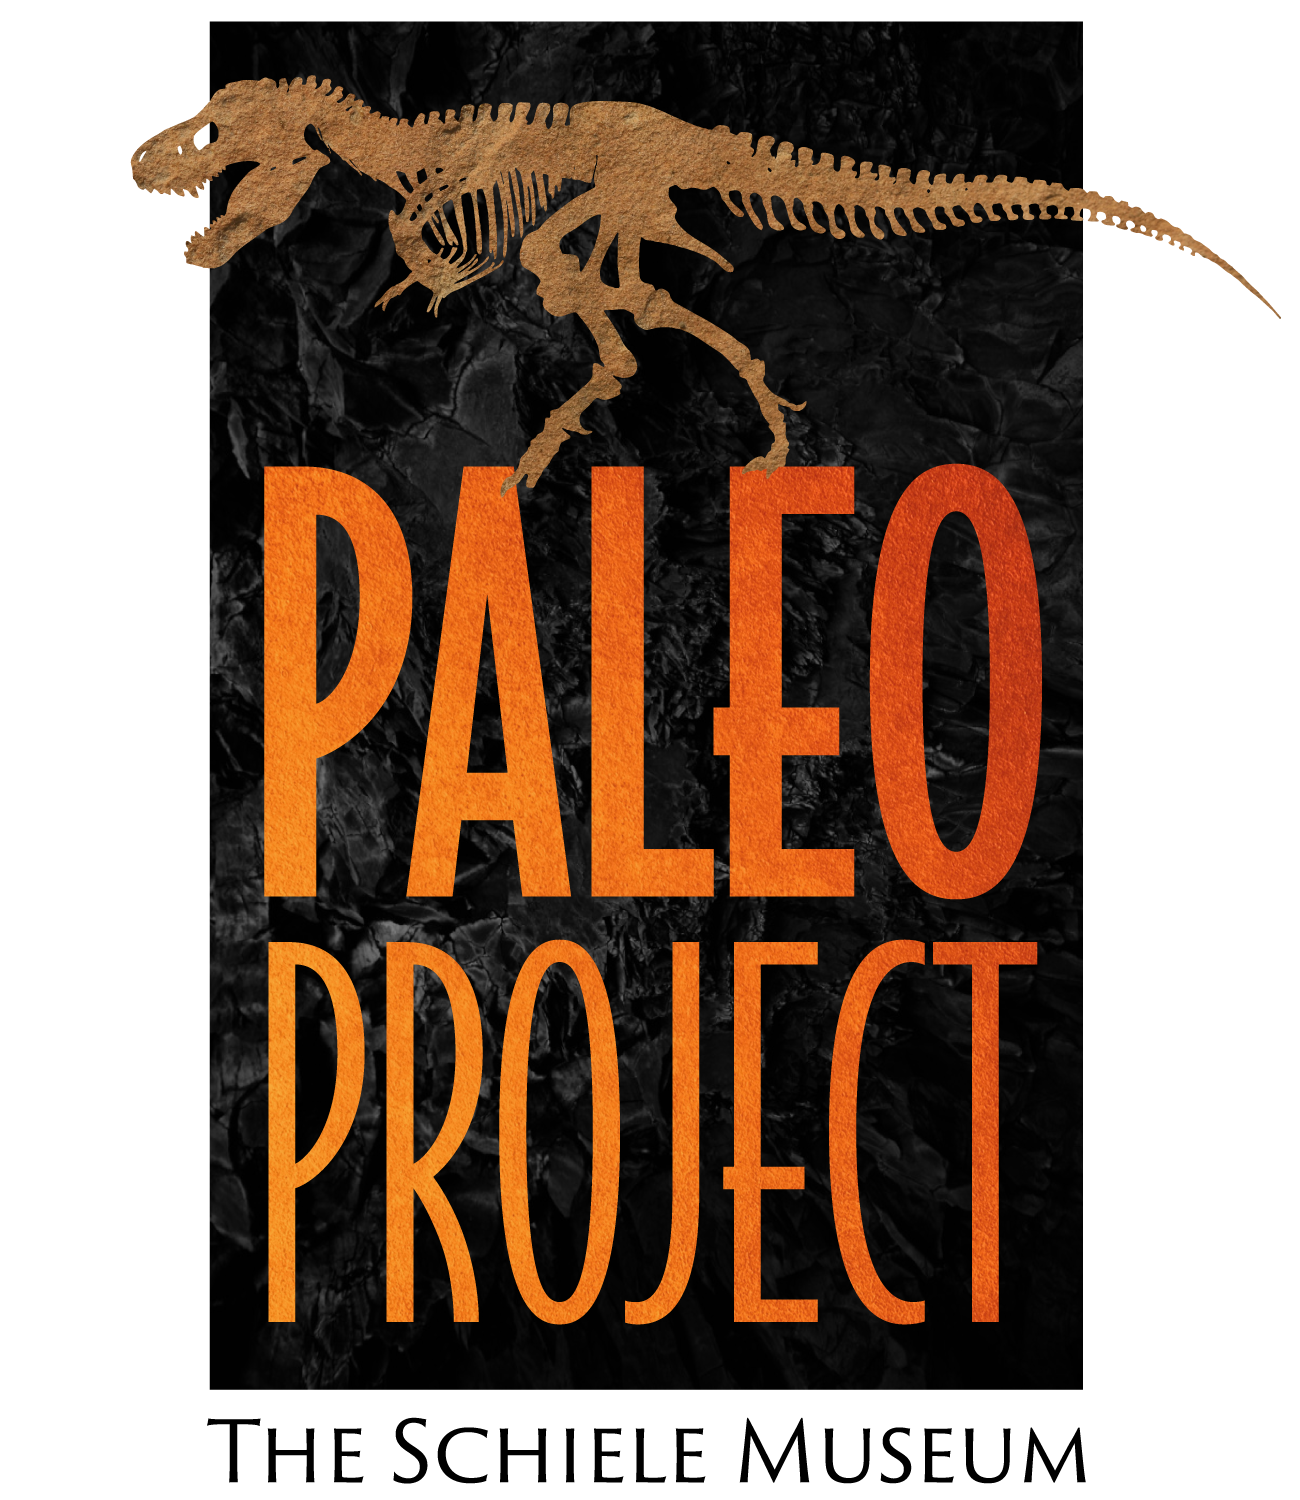 Paleo Project and T rex image